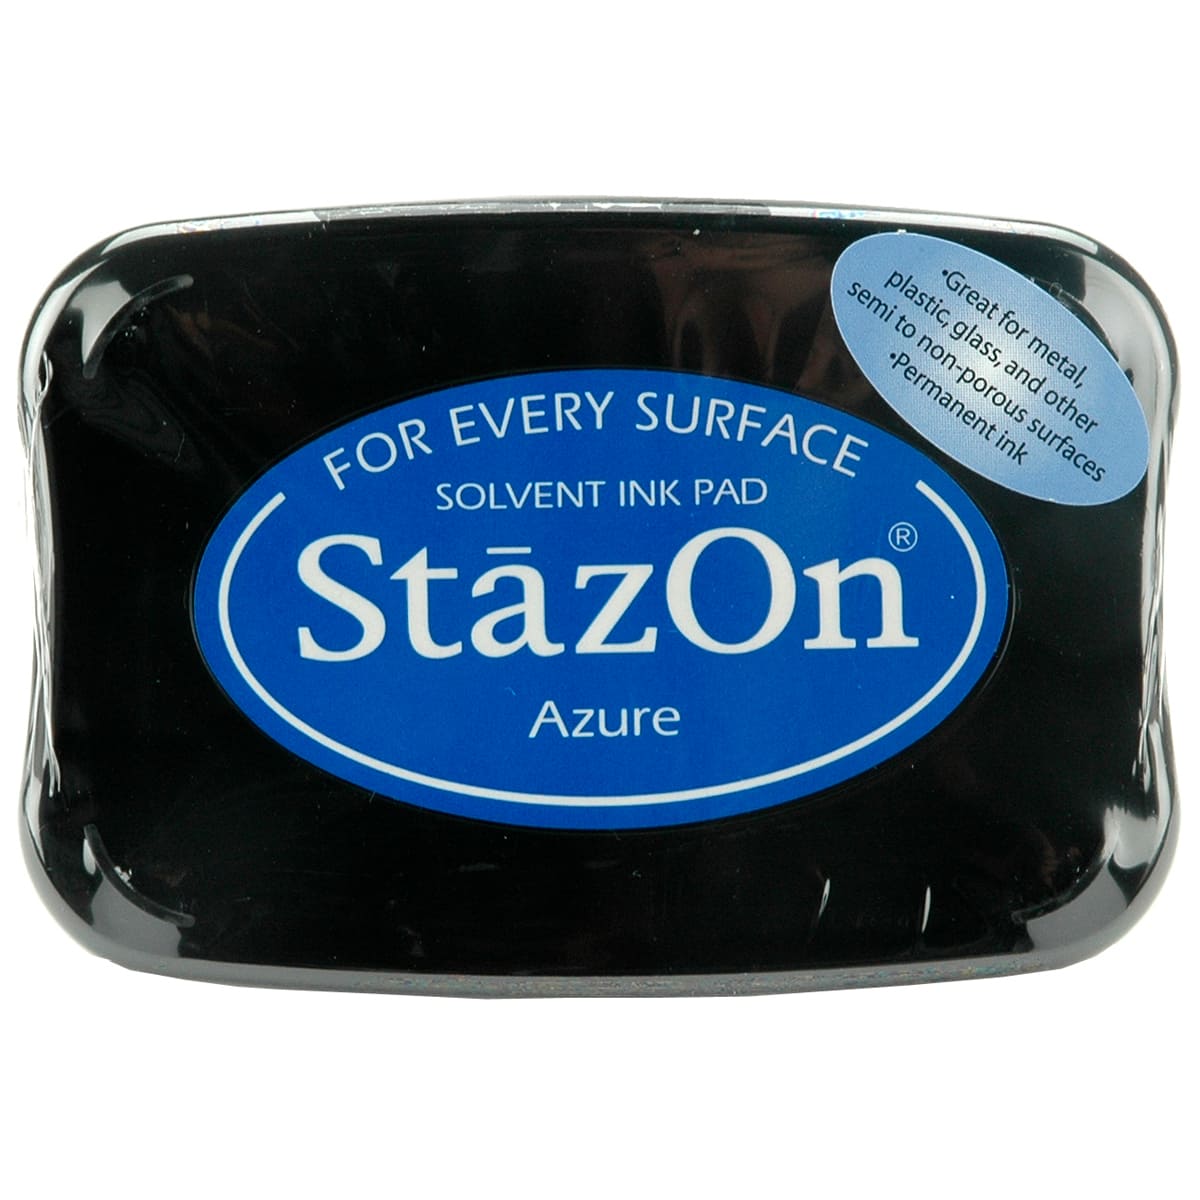 Stazon Ink Pad, Ink for Glossy Paper, Ink for Most Surfaces 